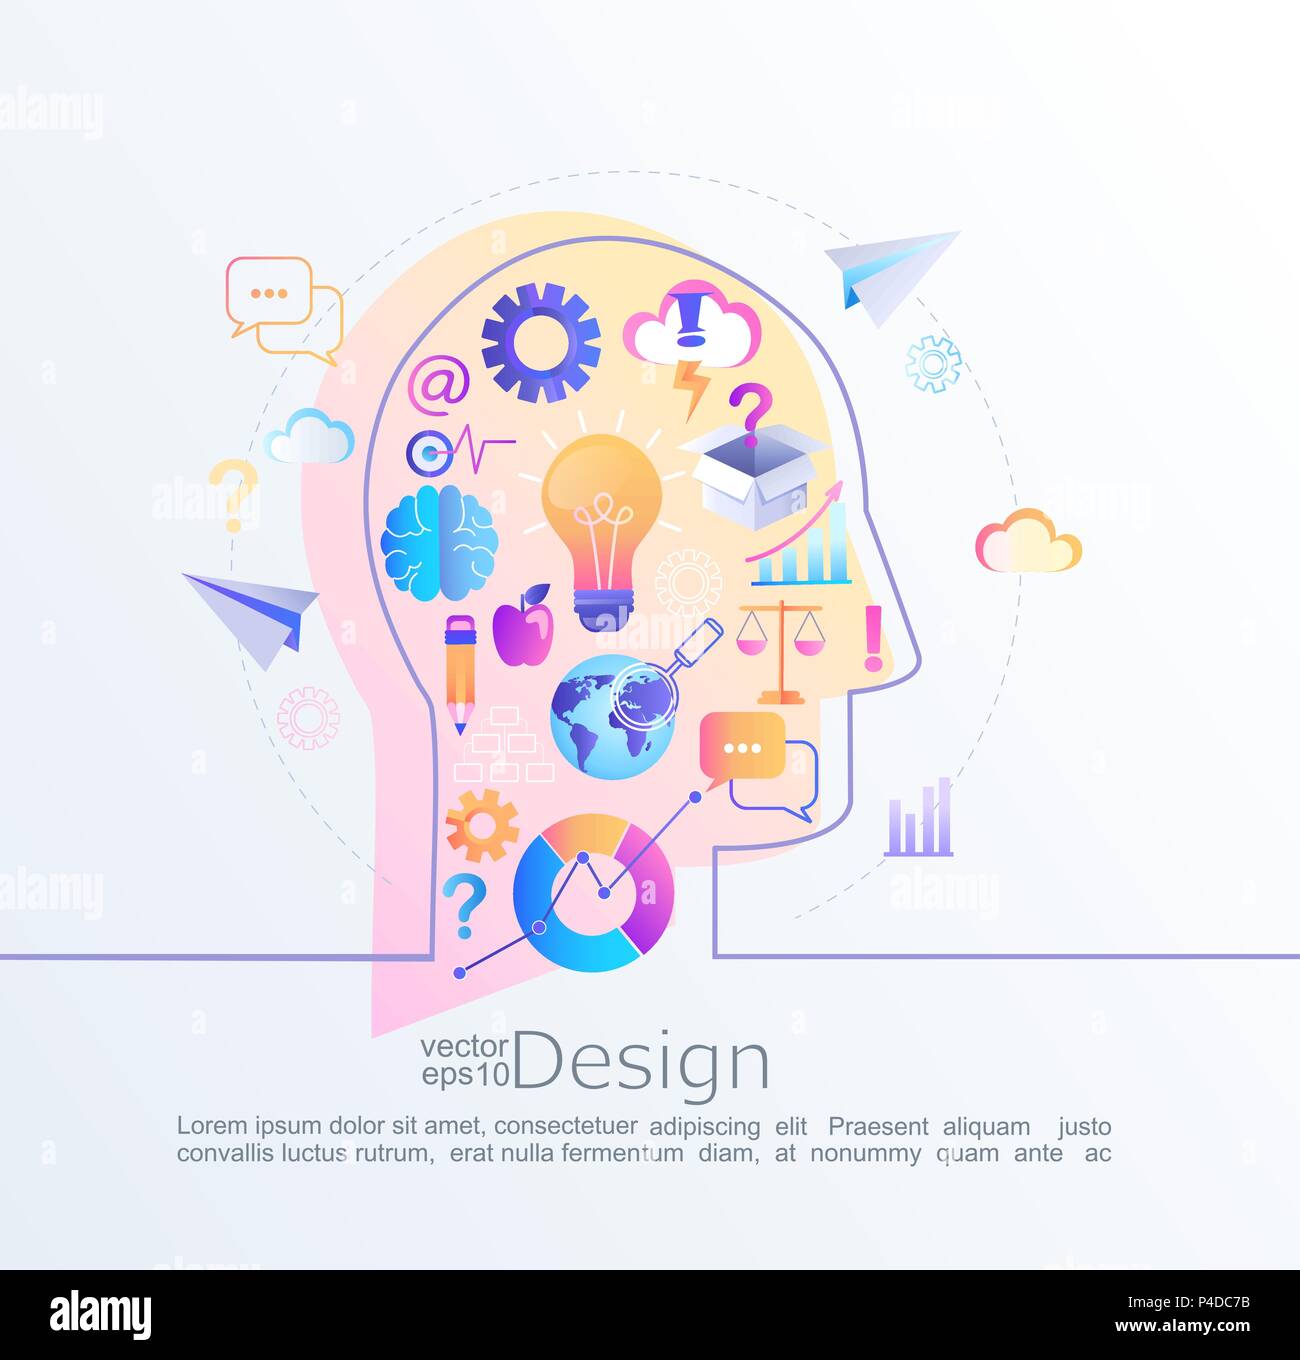 Creative infographic concept of big inspiration in our brain with head profile.Effective thinking. Various signs and symbols, business icons in flat style that lead to an big idea.Vector illustration. Stock Vector